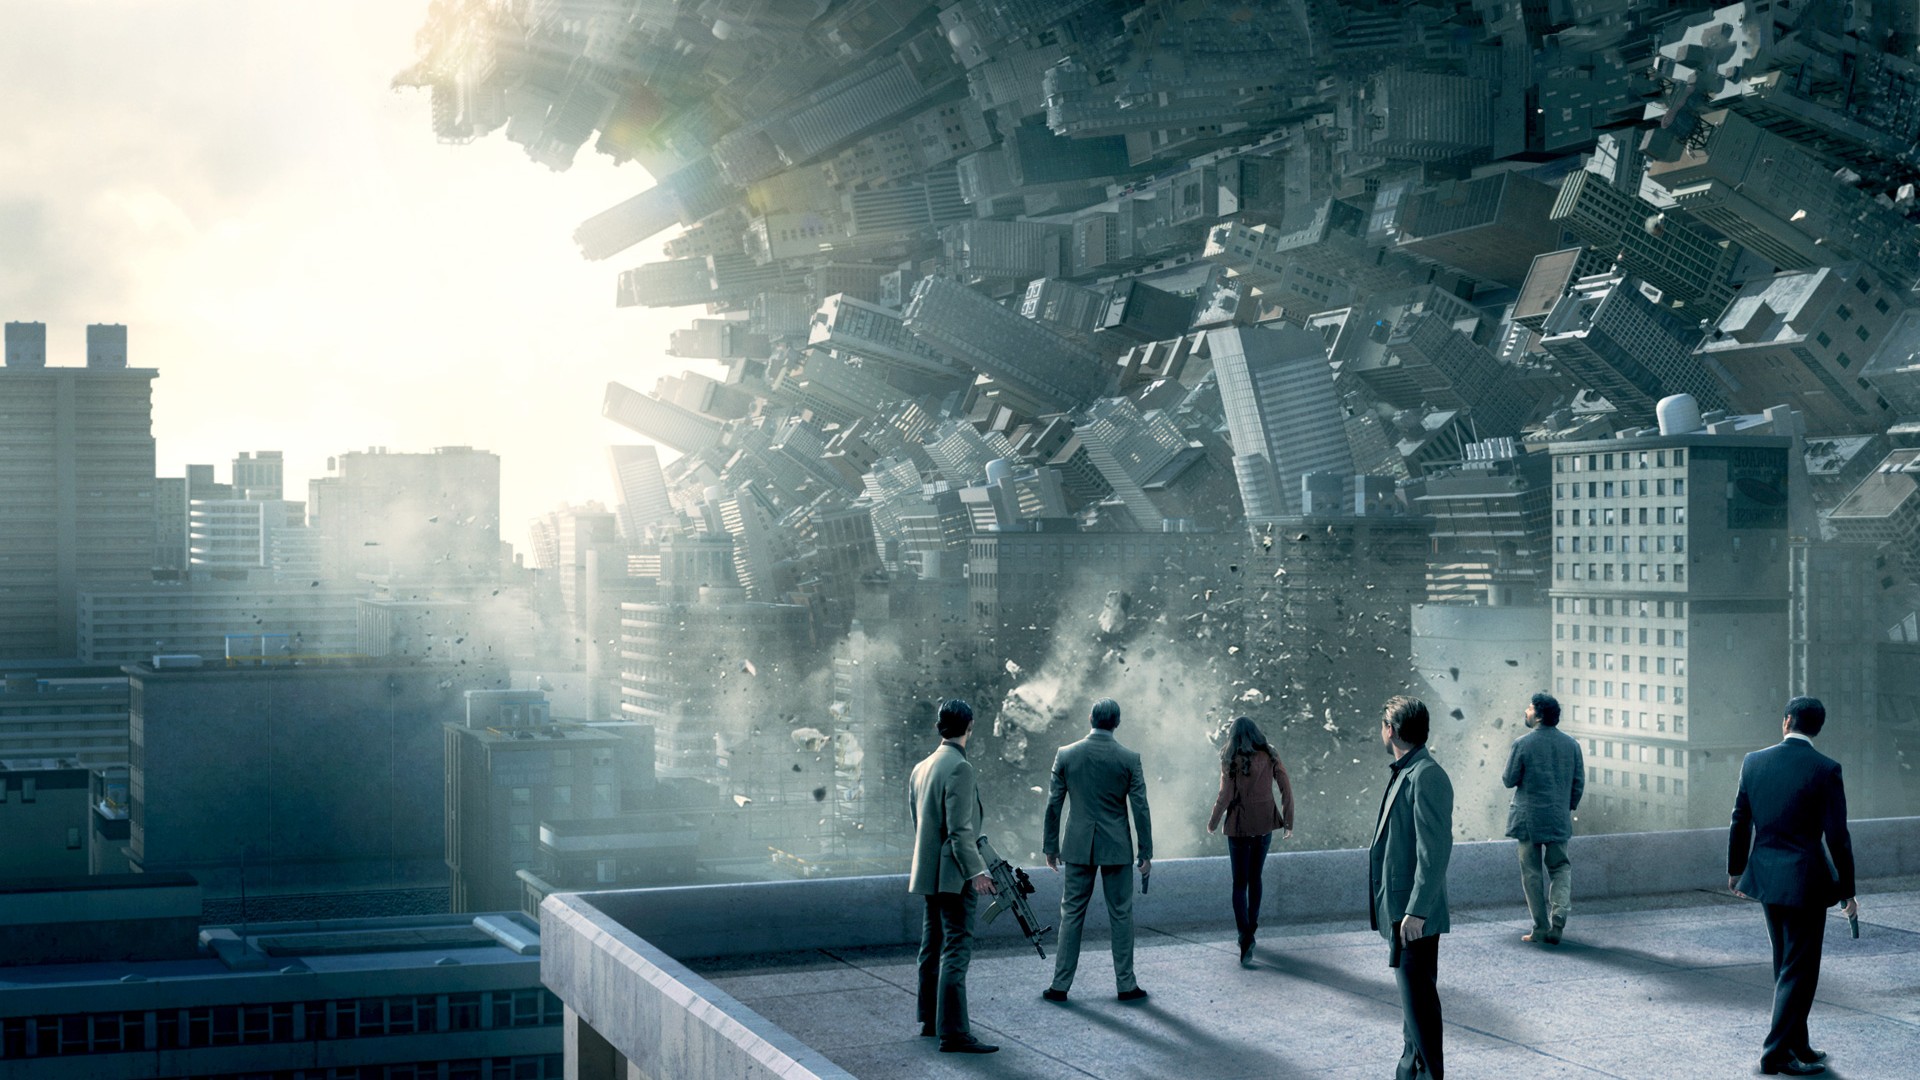 Inception #483308 | Full HD Widescreen wallpapers for desktop download